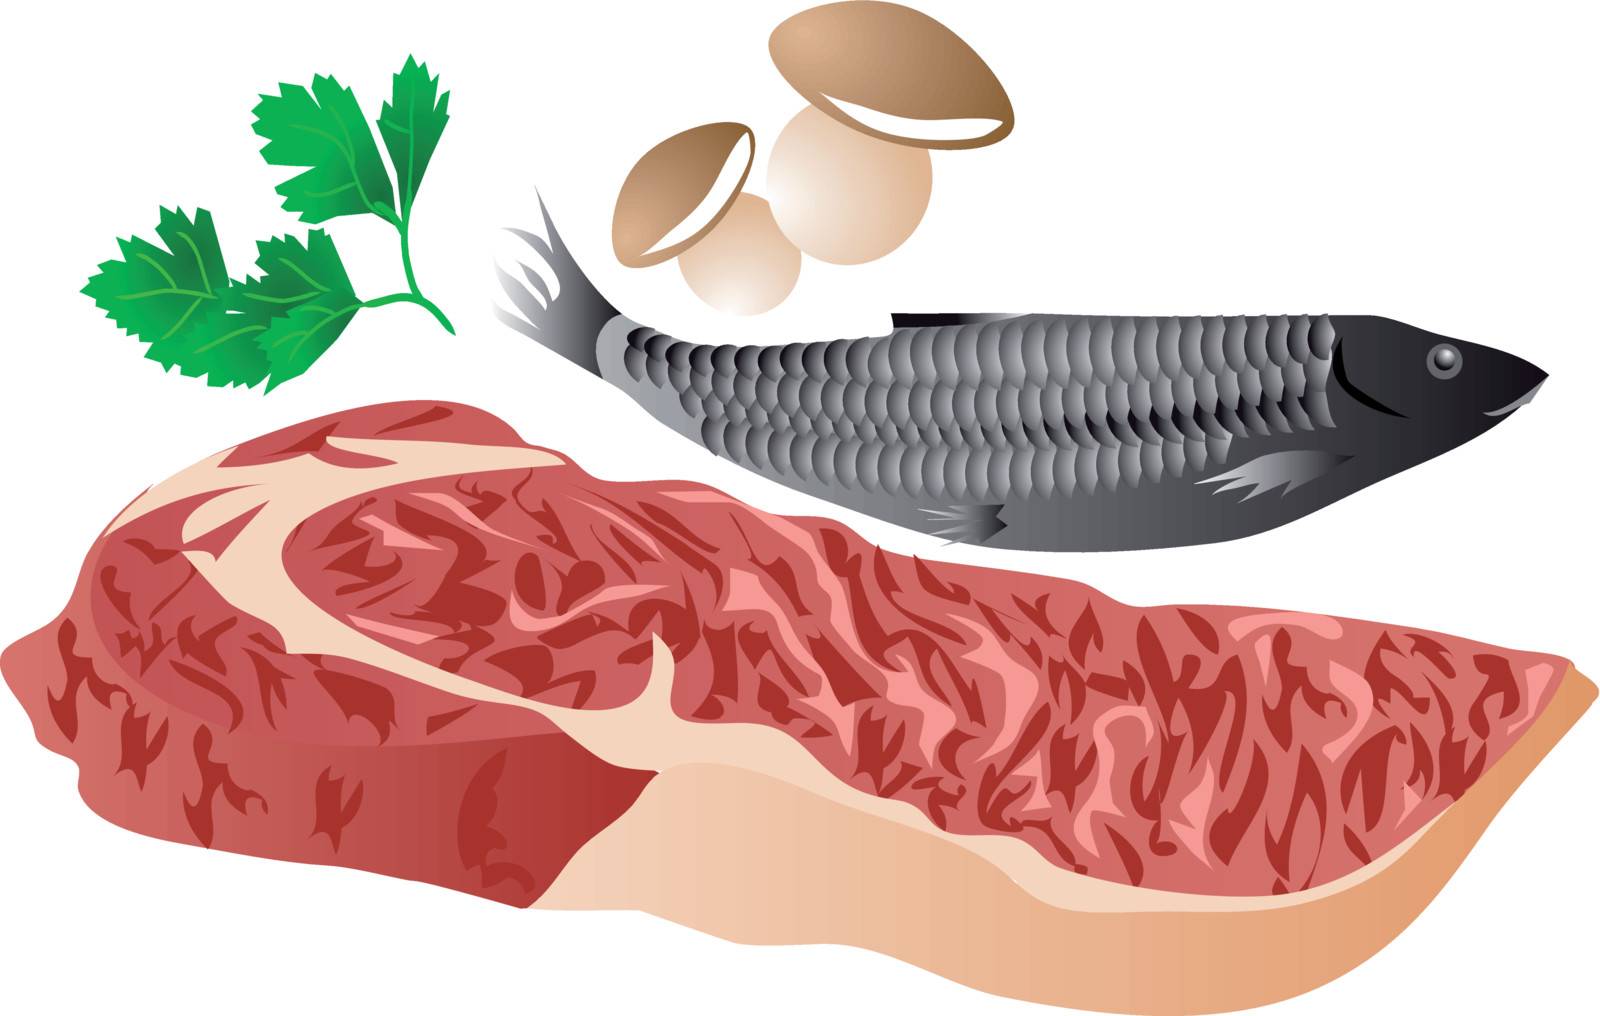 meat, fish and mushrooms isolated on white background